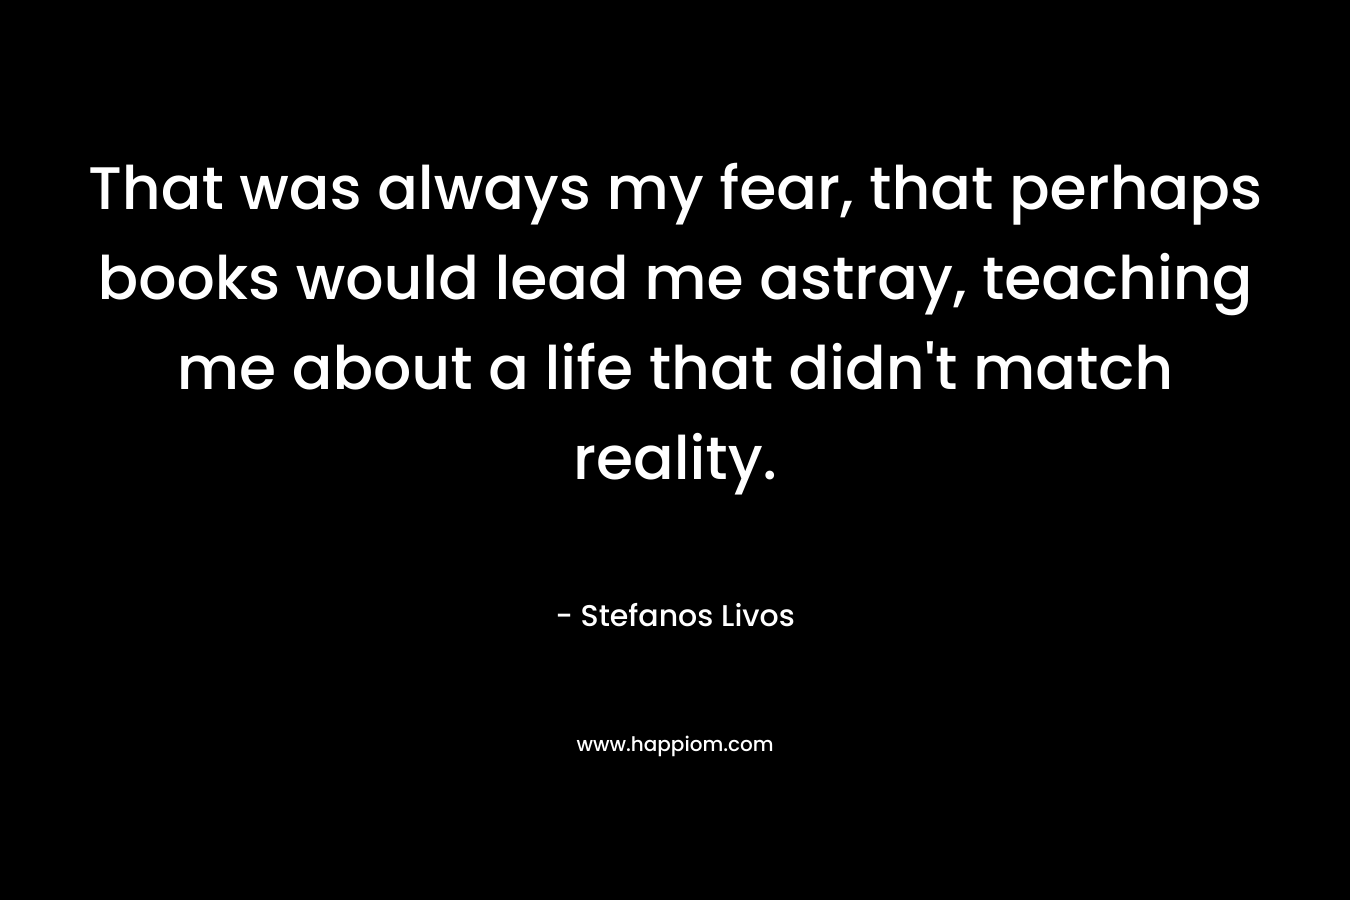 That was always my fear, that perhaps books would lead me astray, teaching me about a life that didn’t match reality. – Stefanos Livos